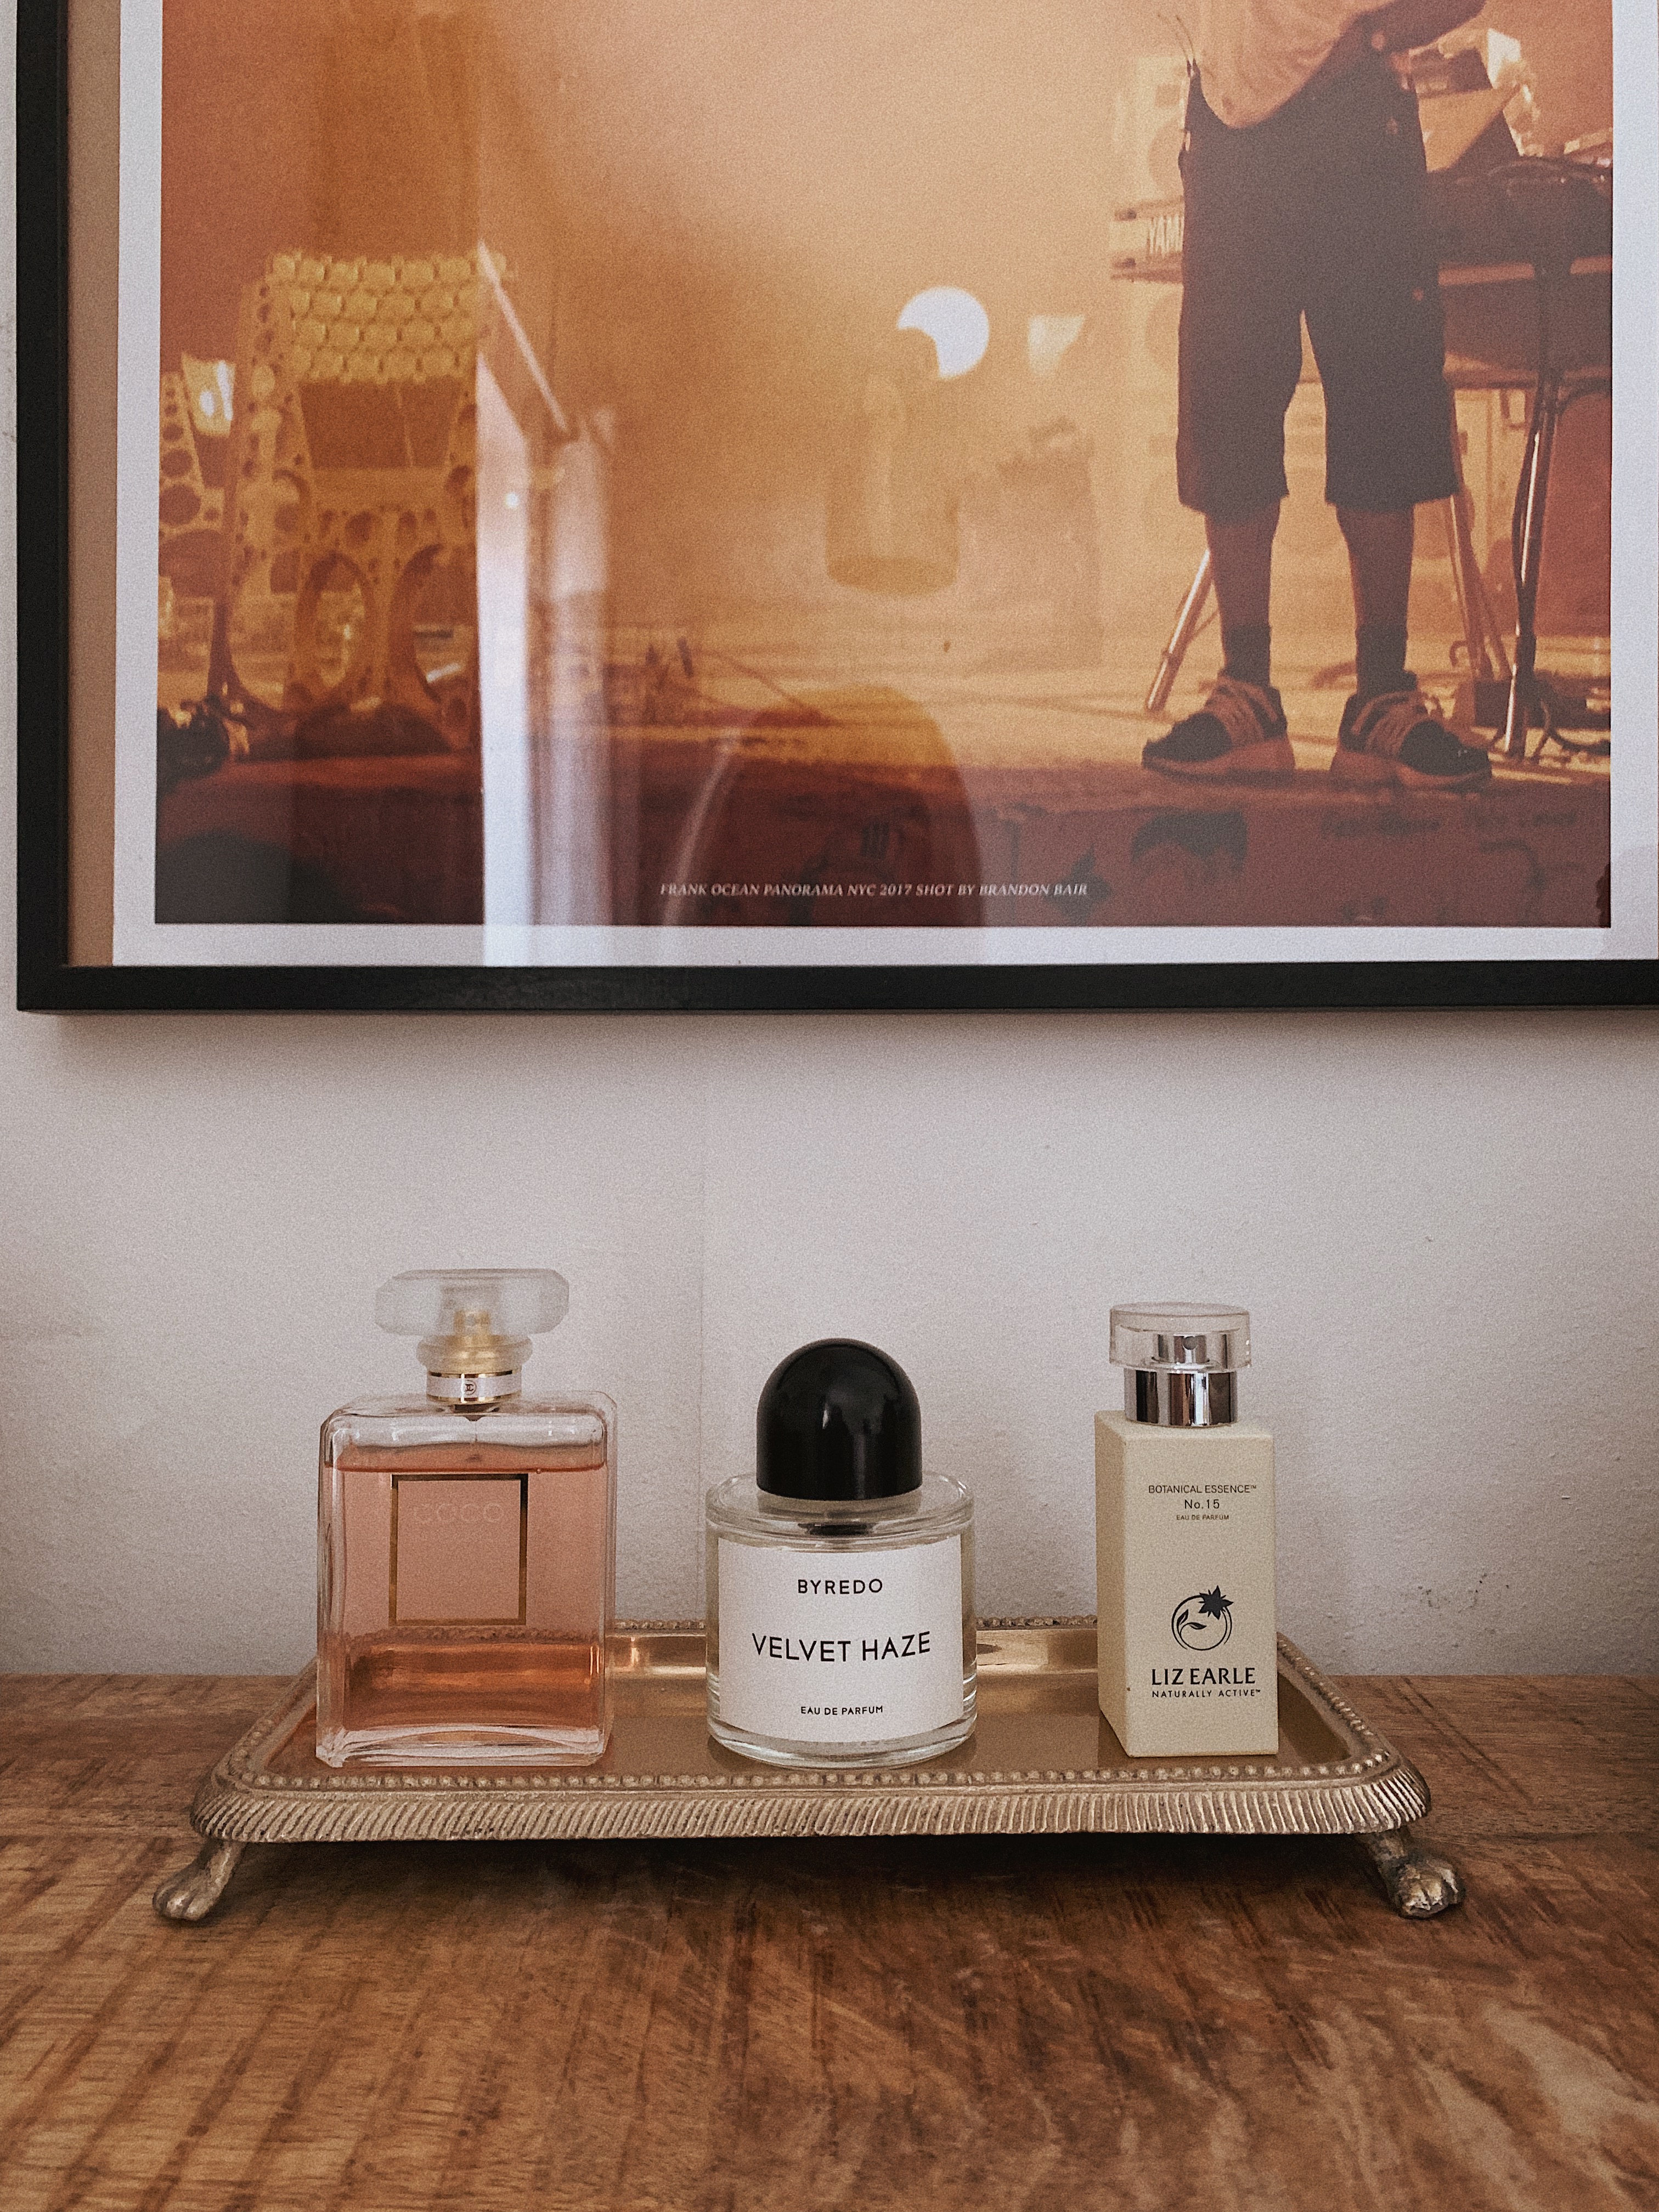 Perfumes on a gold tray - Chanel, Byredo and Liz Earle